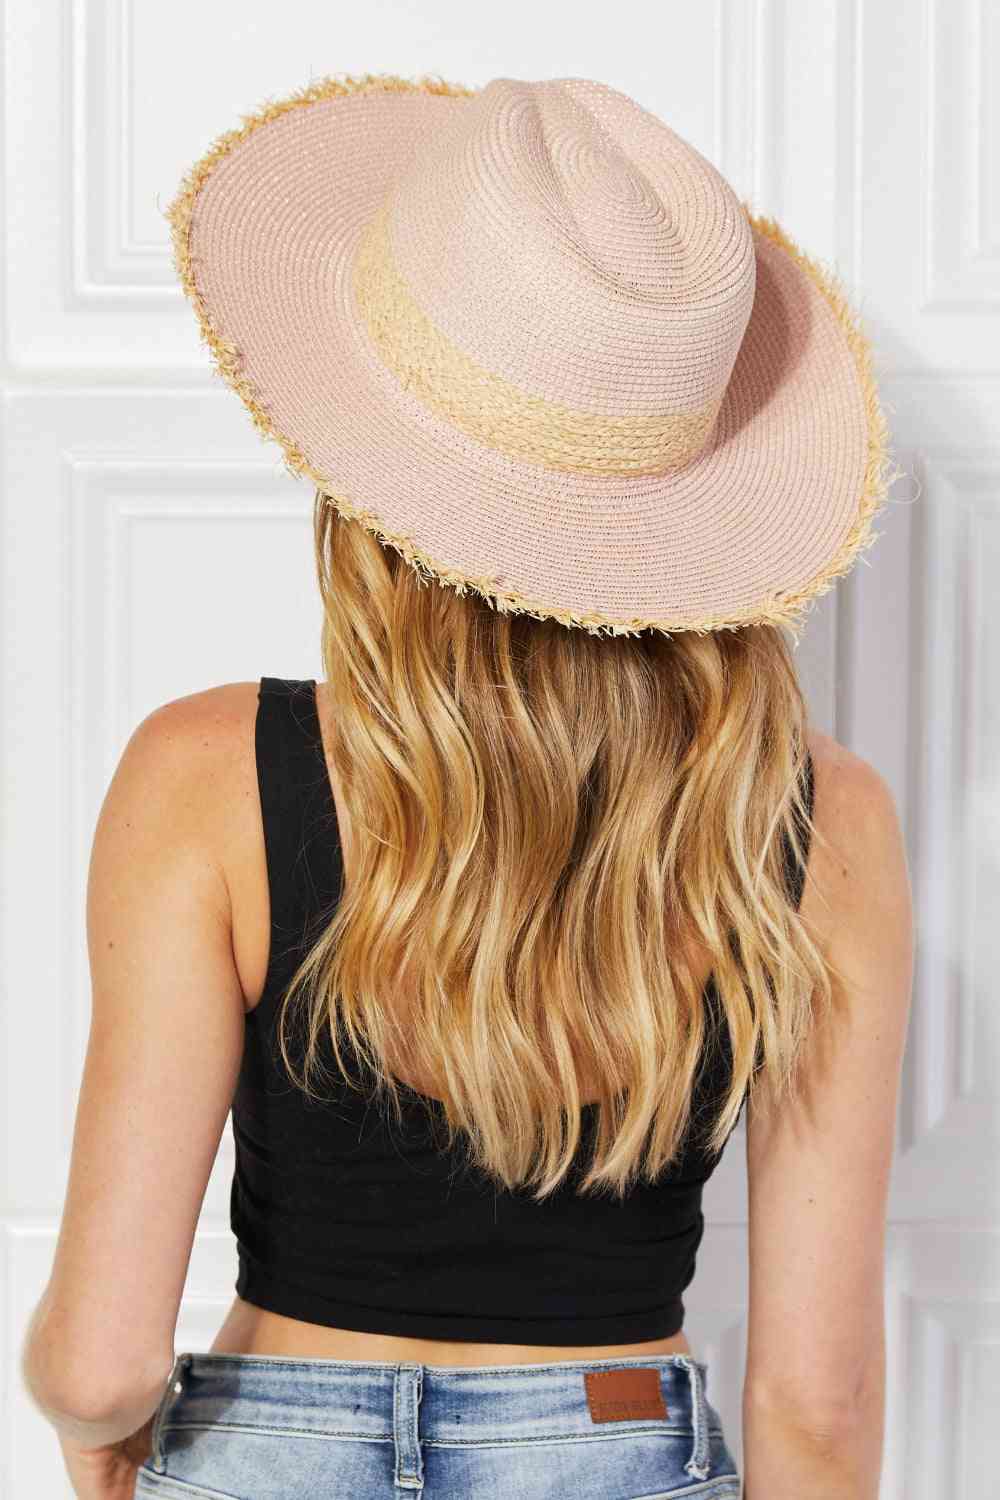 Justin Taylor Poolside Baby Straw Fedora Hat in Pale Blush Pale Blush One Size